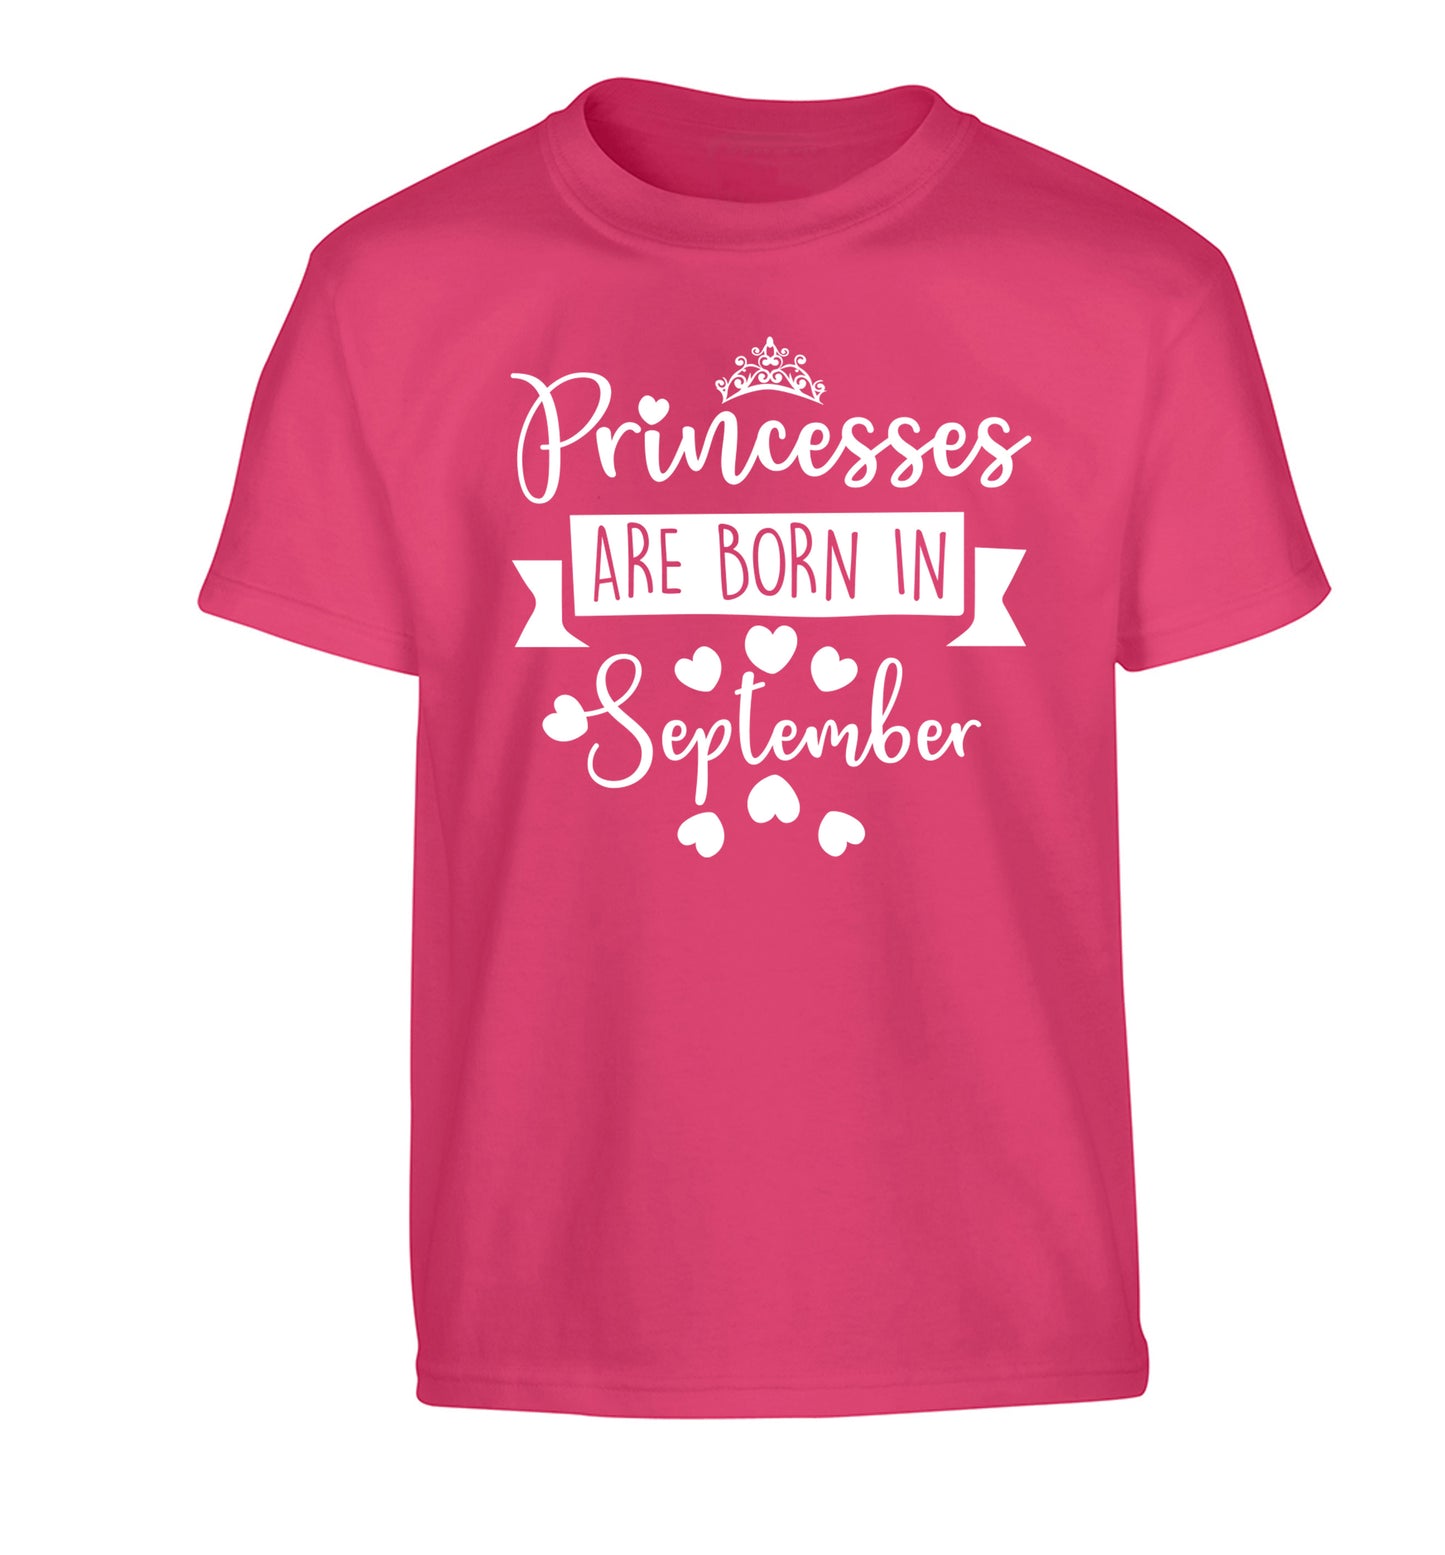 Princesses are born in September Children's pink Tshirt 12-13 Years